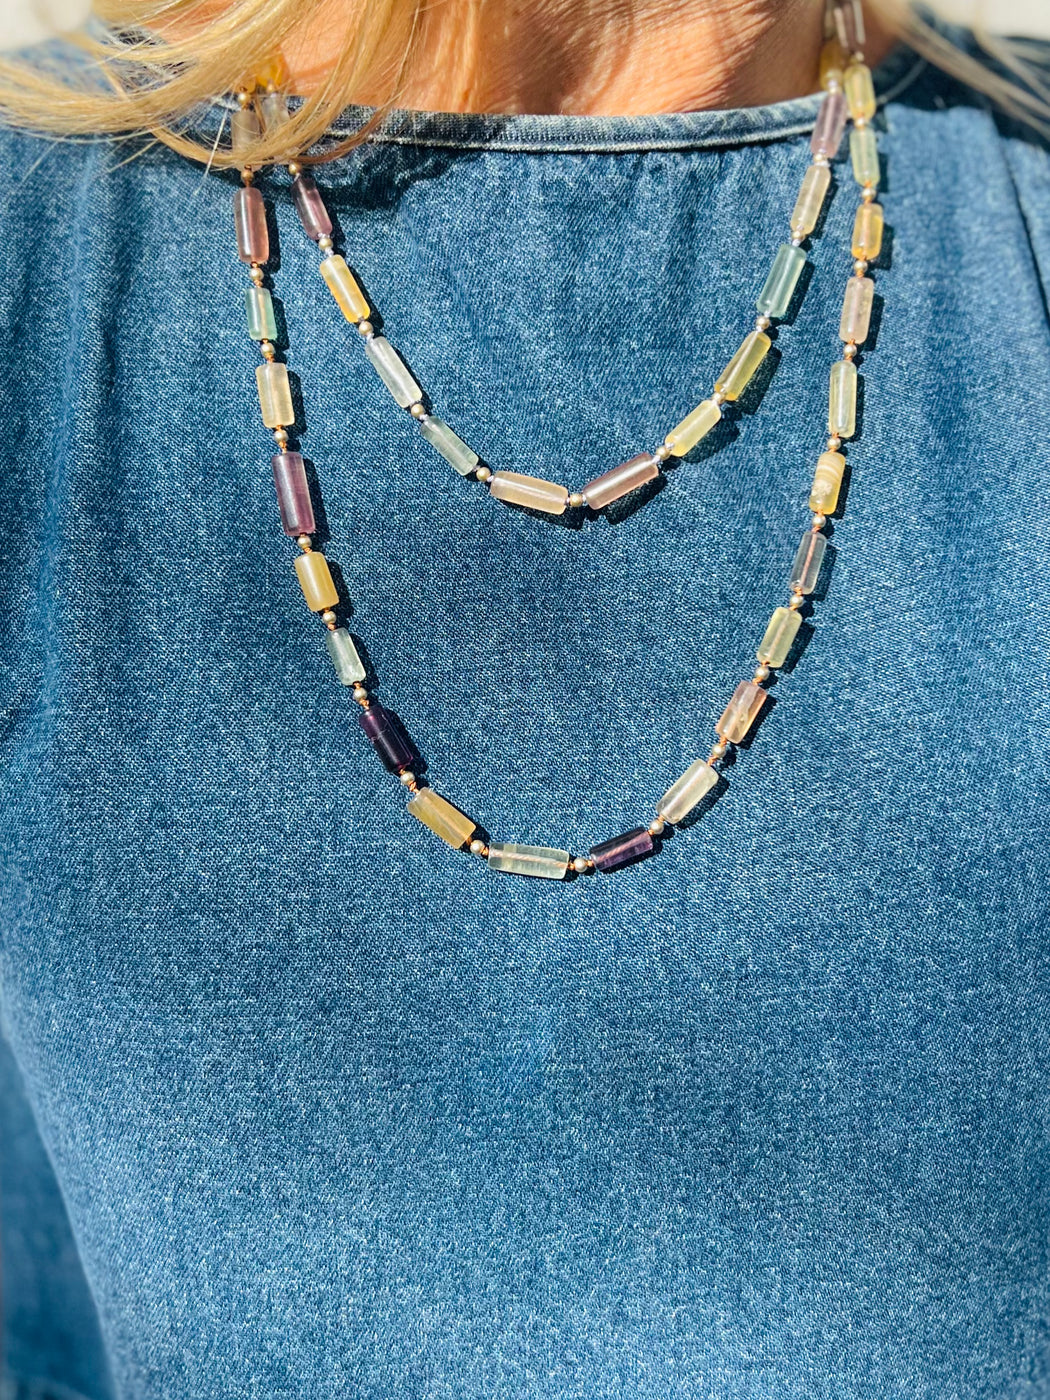 Ground into Mama Earth's natural beauty with organic colors of Tourmaline, hand knotted on silk chord with gold accents for the Empress that you are.  Materials Matter: Varied color tourmaline tube beads, hand knotted on silk cord with gold fill findings and lobster clasp. Necklace Designed in California by Carrie Marill.